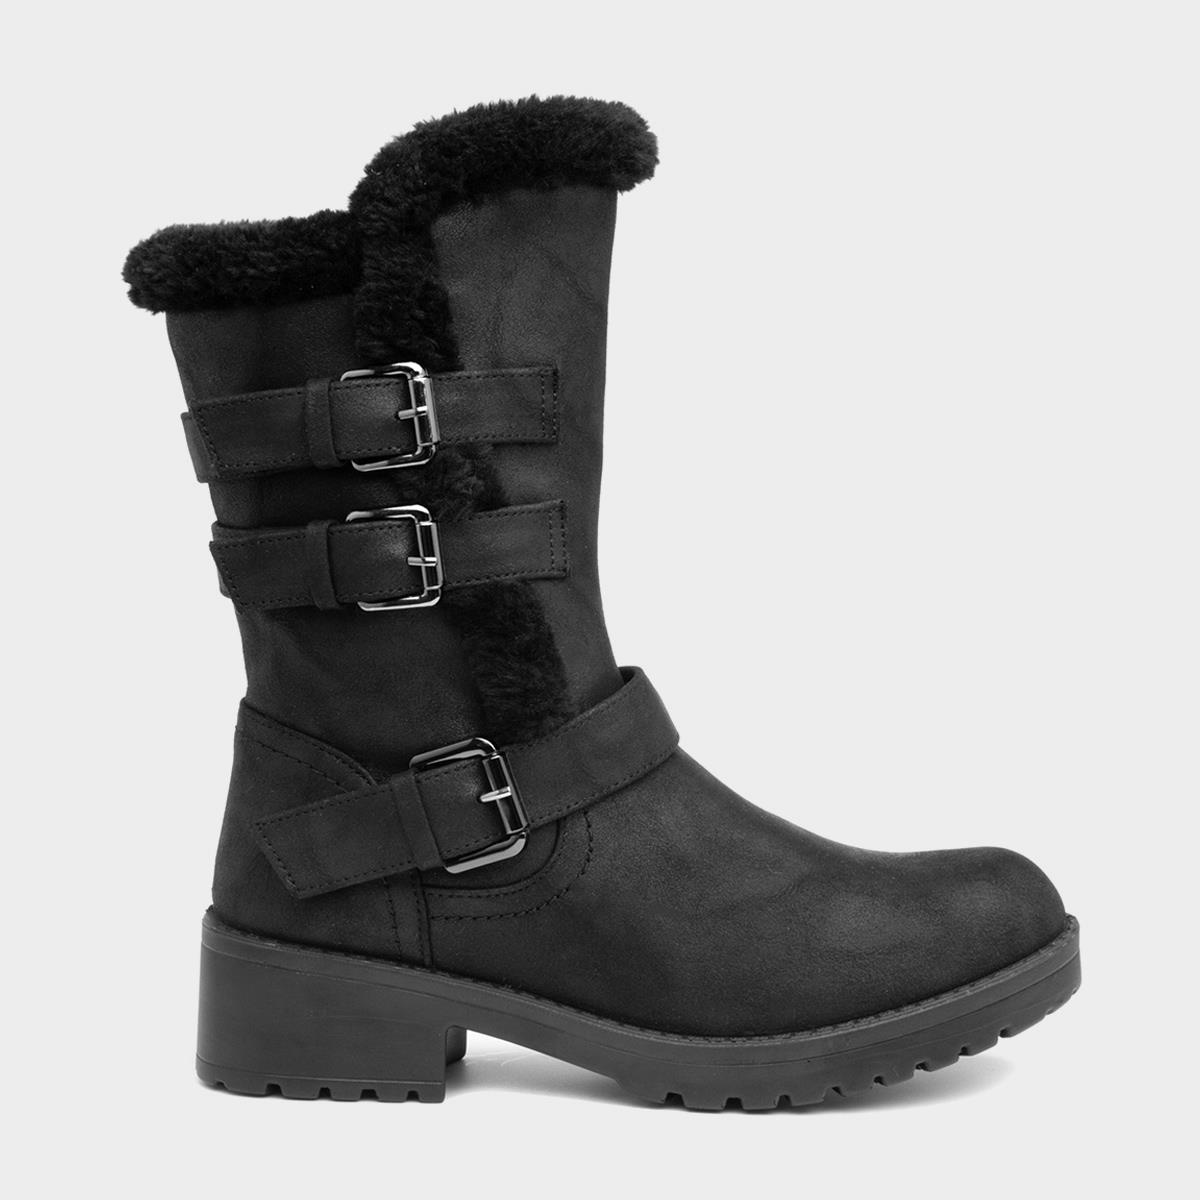 Lilley Womens Black Buckle Calf Boot-181019 | Shoe Zone